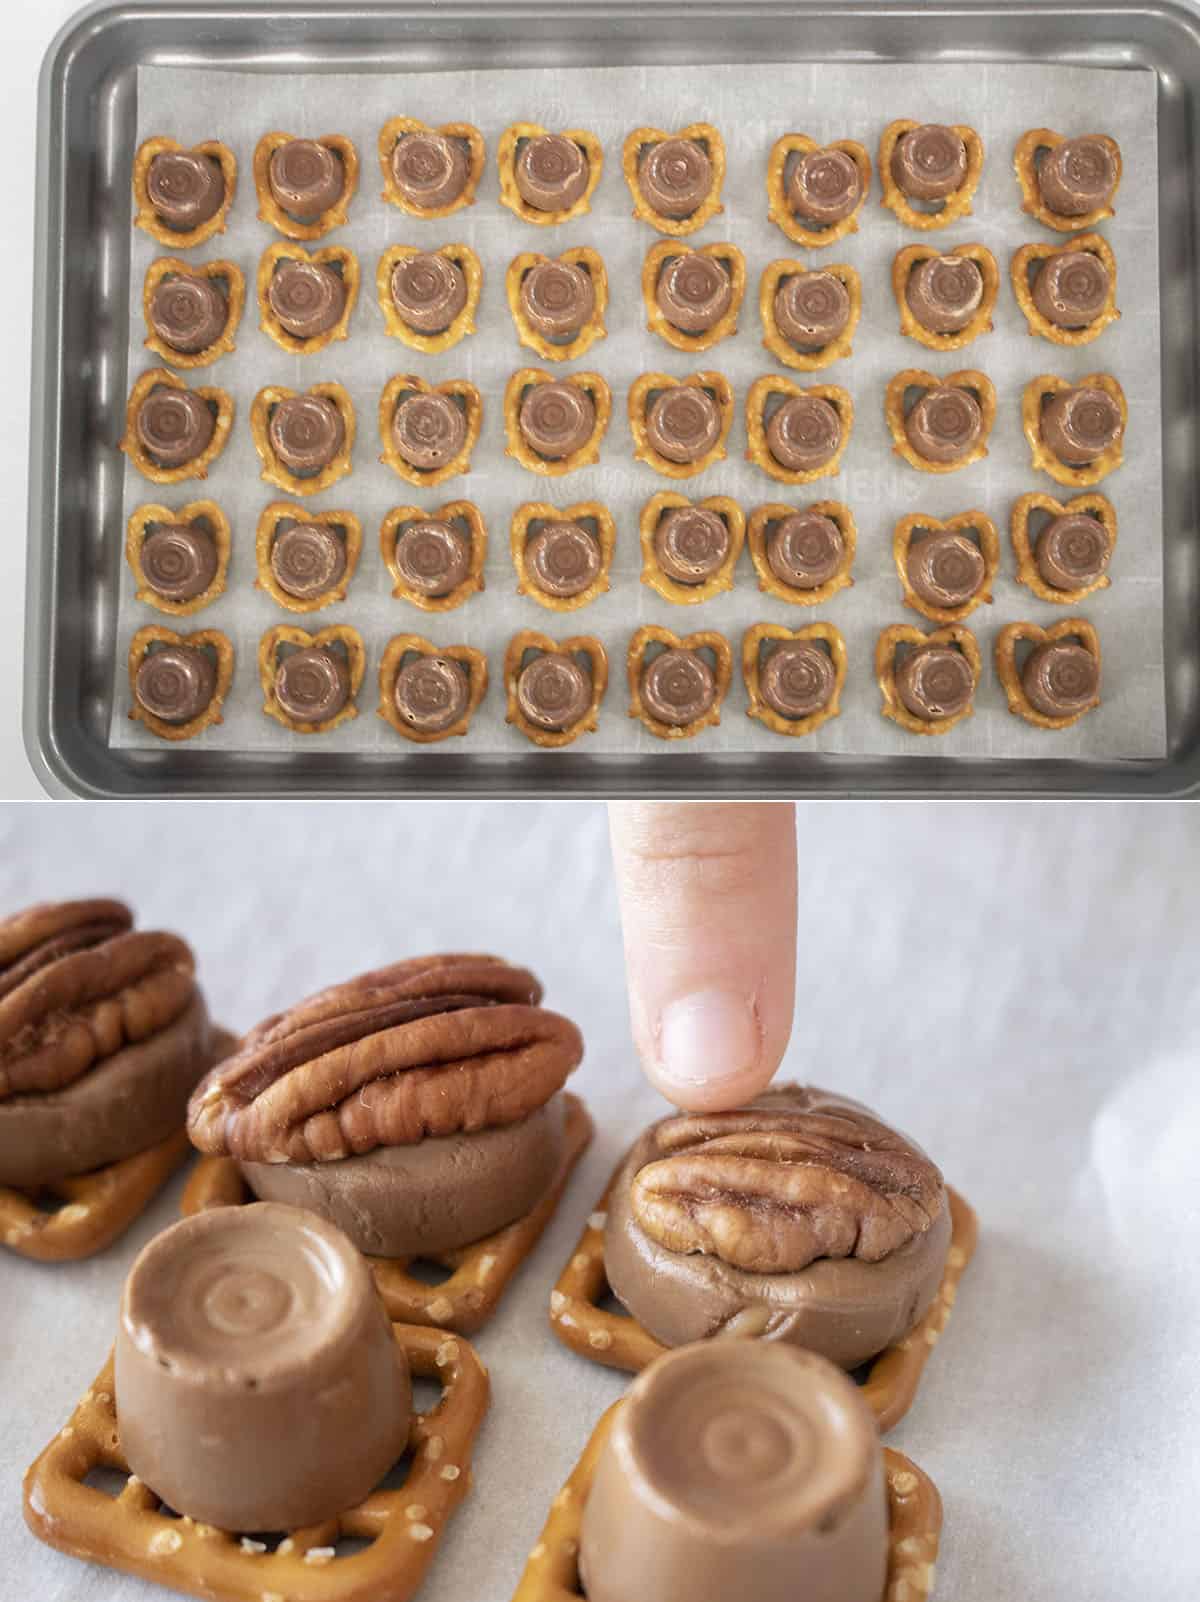 Process of how to make Rolo pretzels.